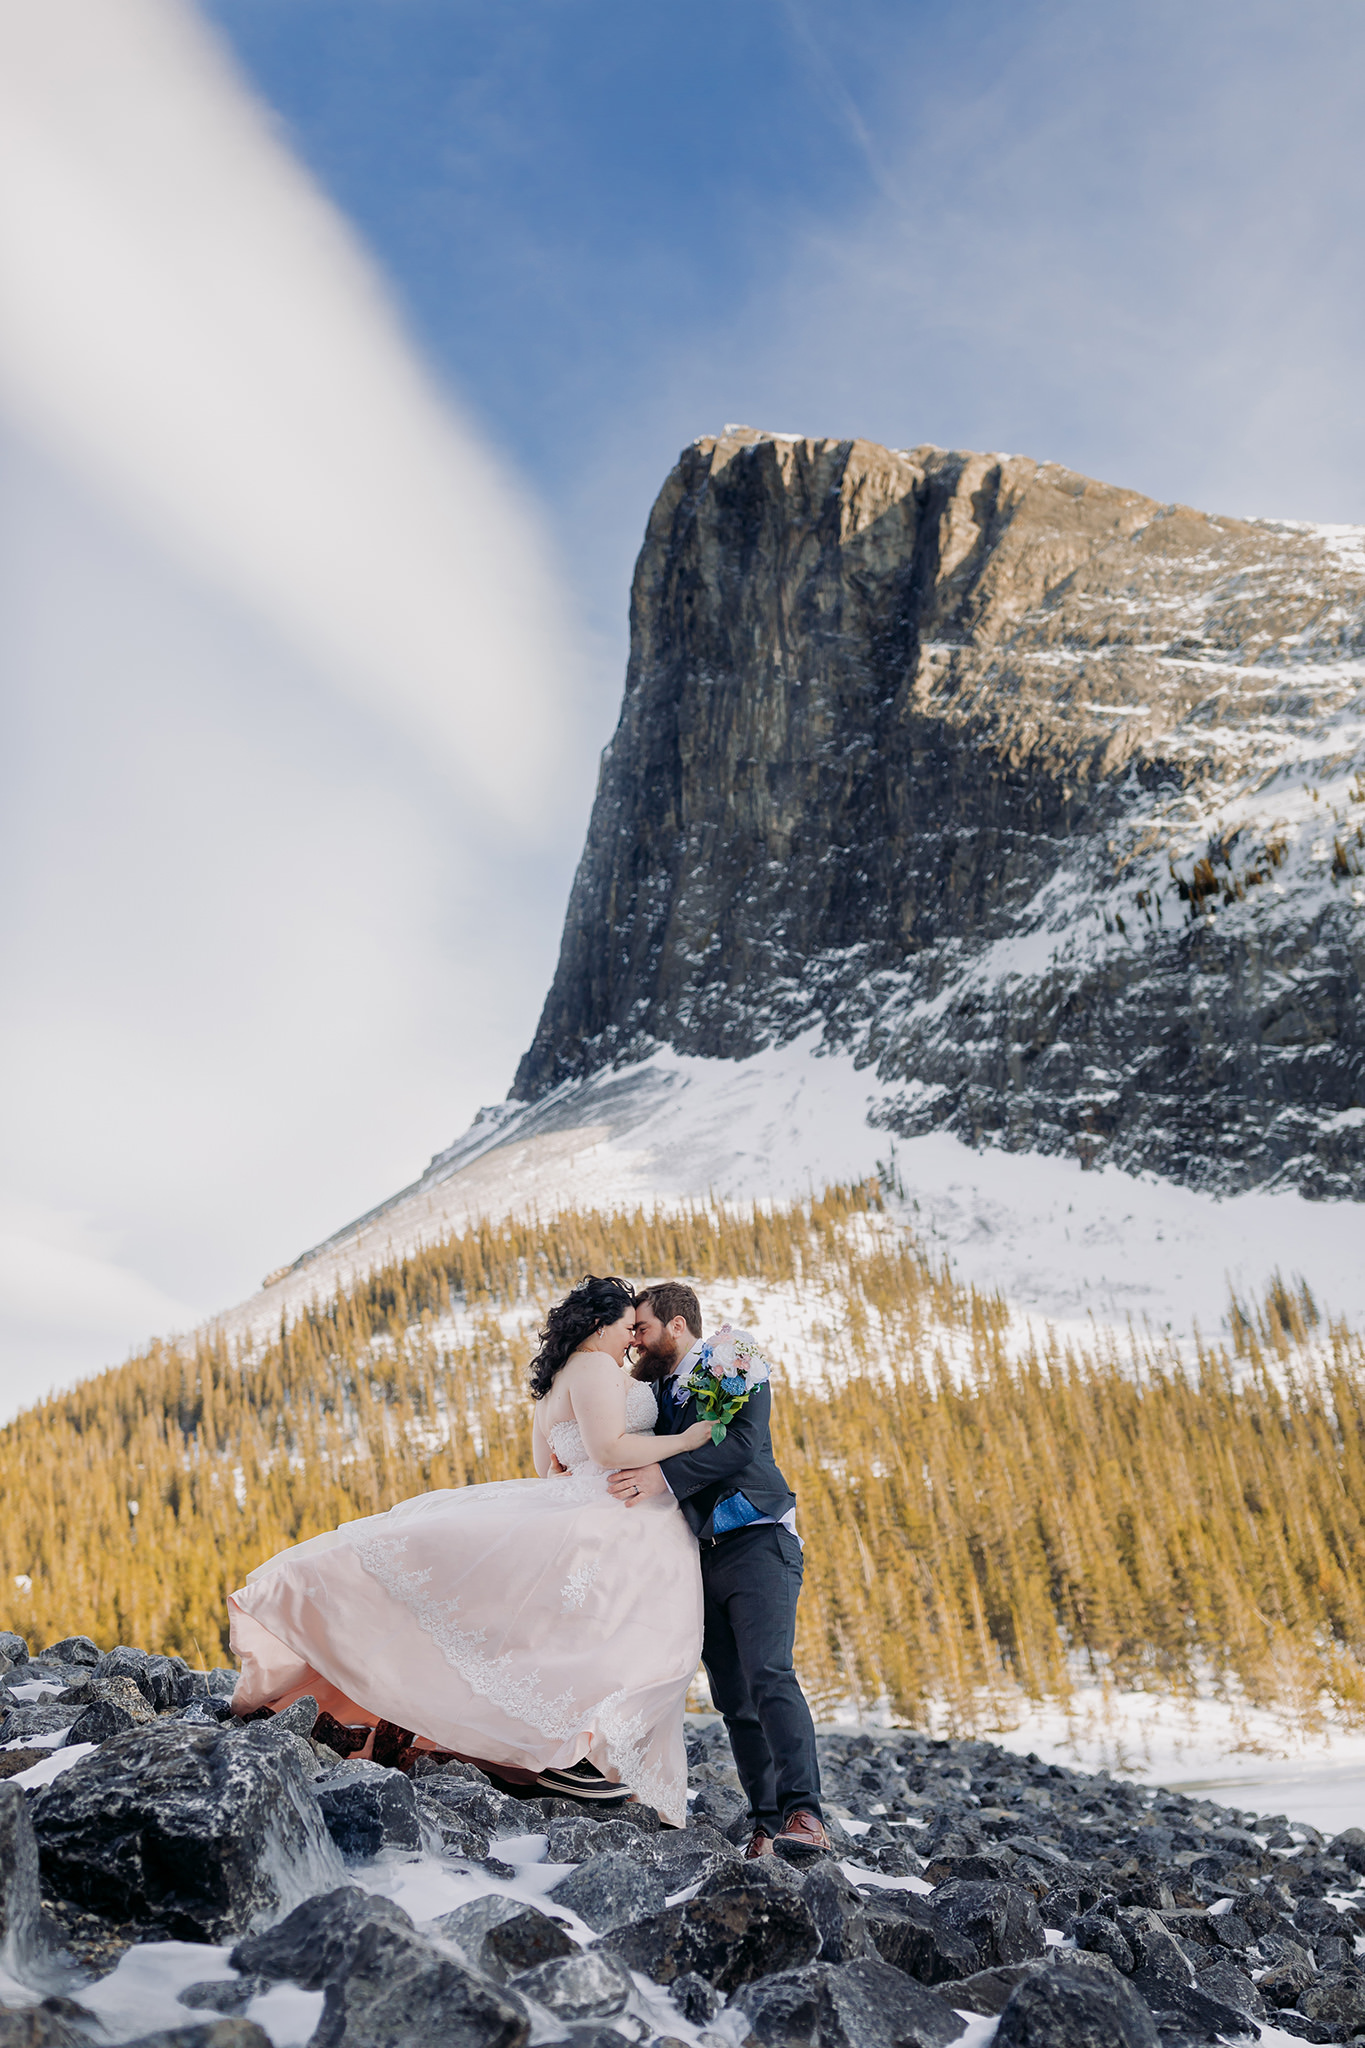  Canmore winter wedding photos bride & groom at Goat Pond in Kananaskis photographed by ENV Photography Ha Ling Peak